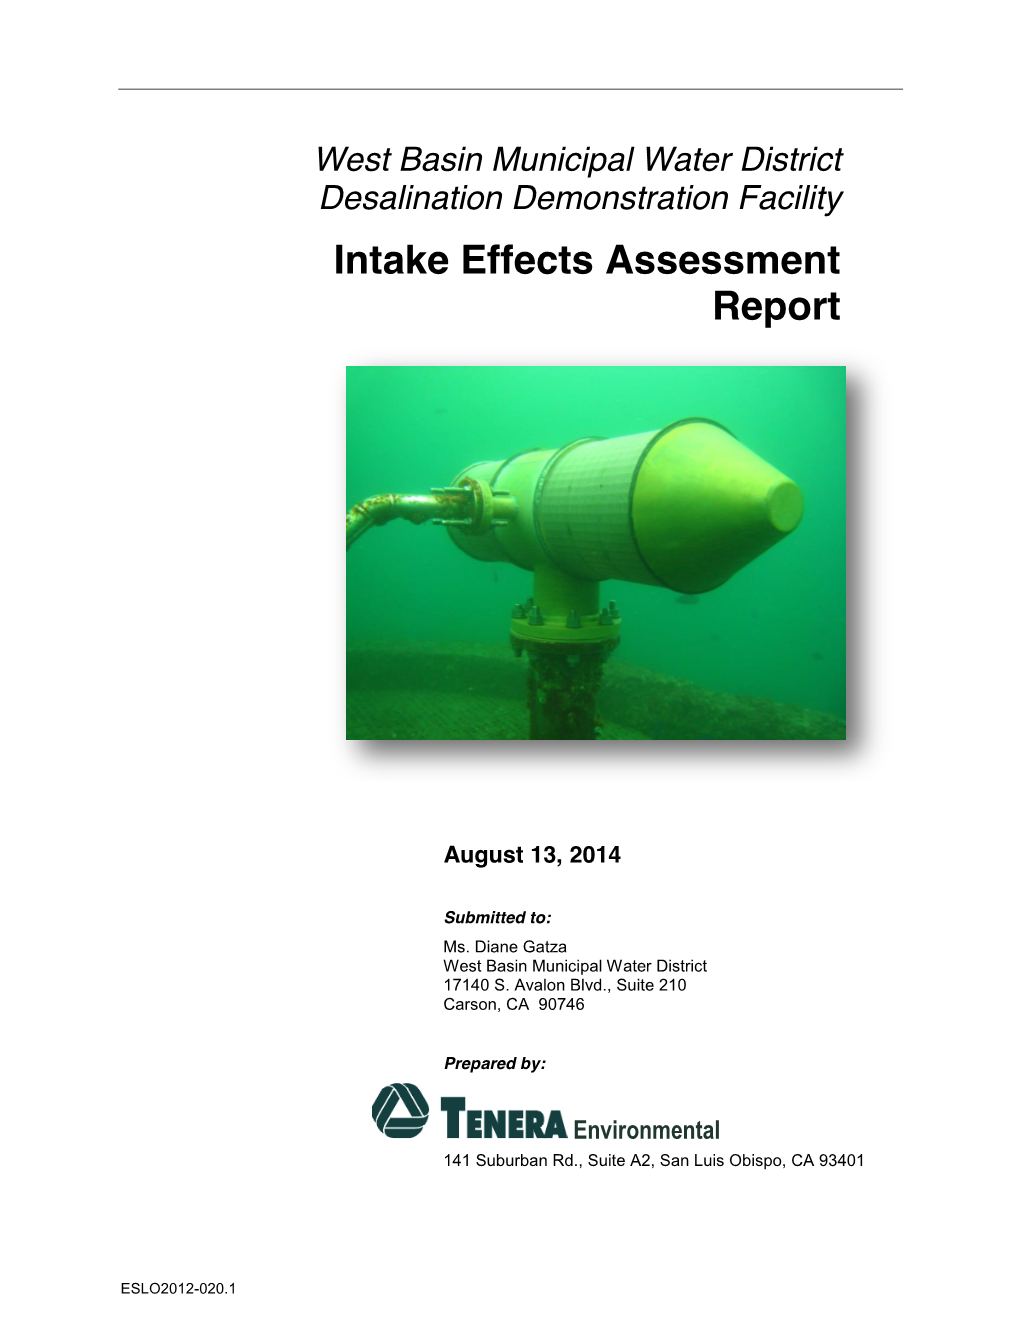 Appendix 4A. Intake Effects Assessment Report